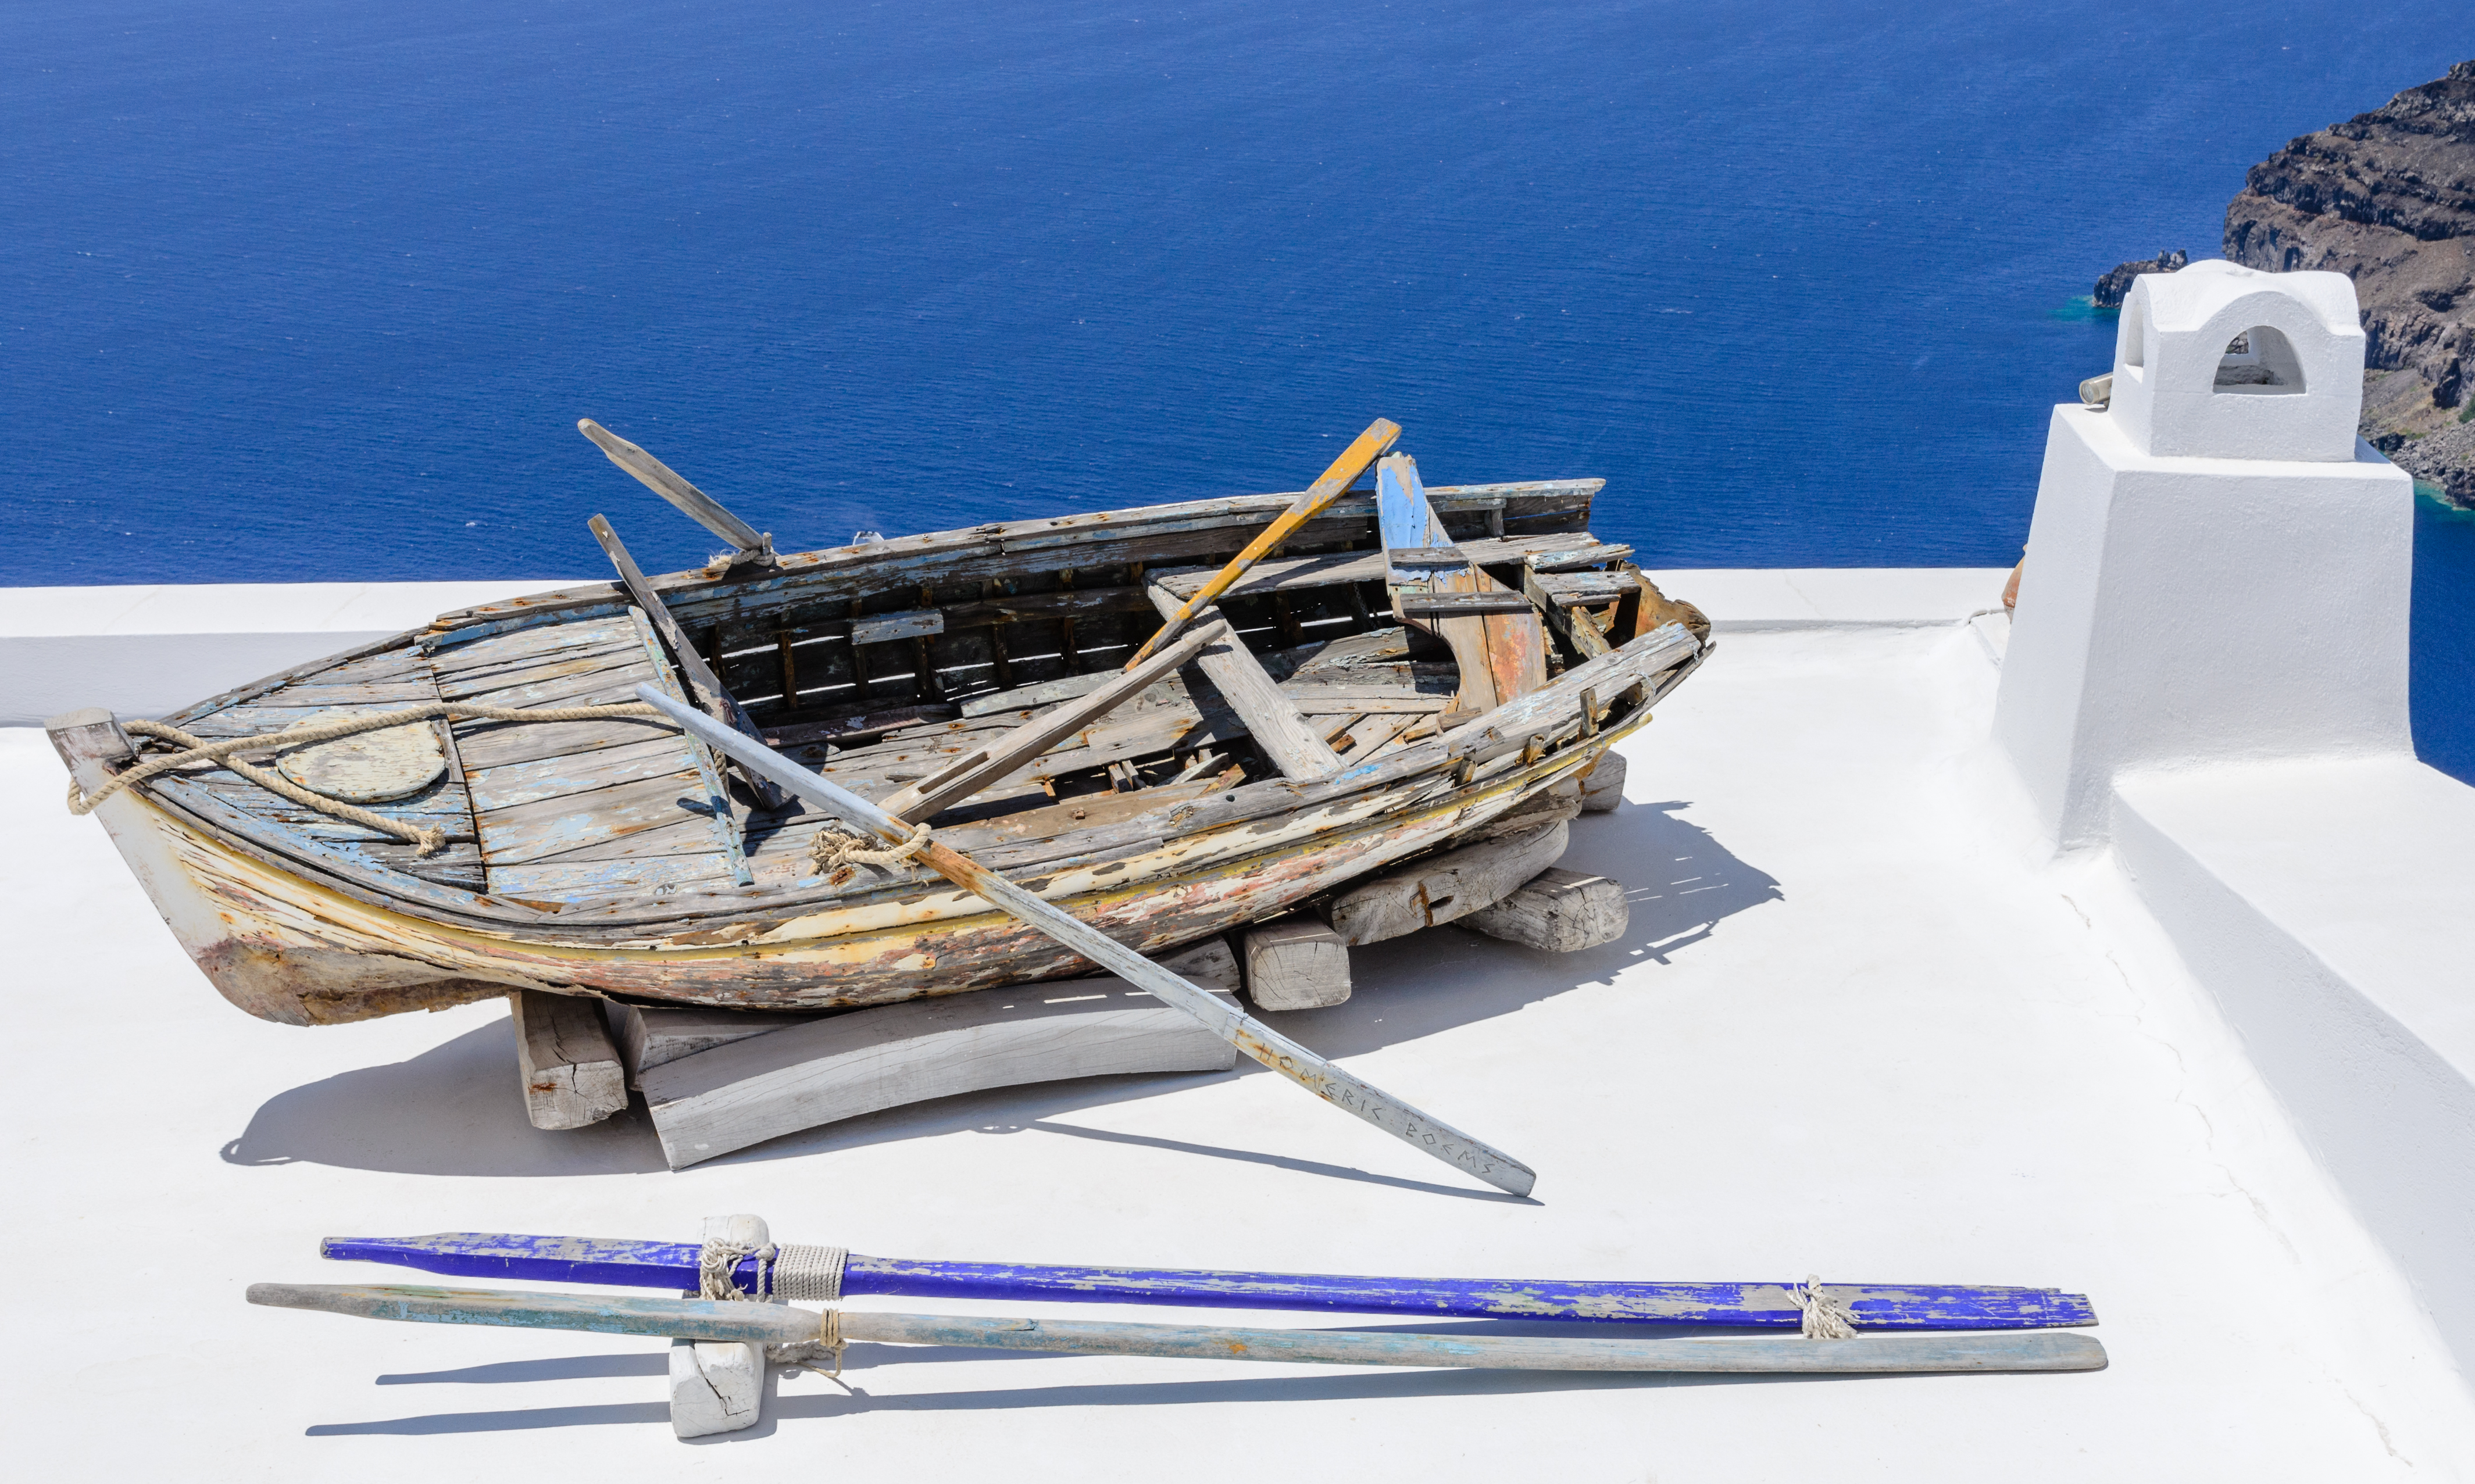 Rowing boat on a house roof - Fira - Santorini - Greece - 02